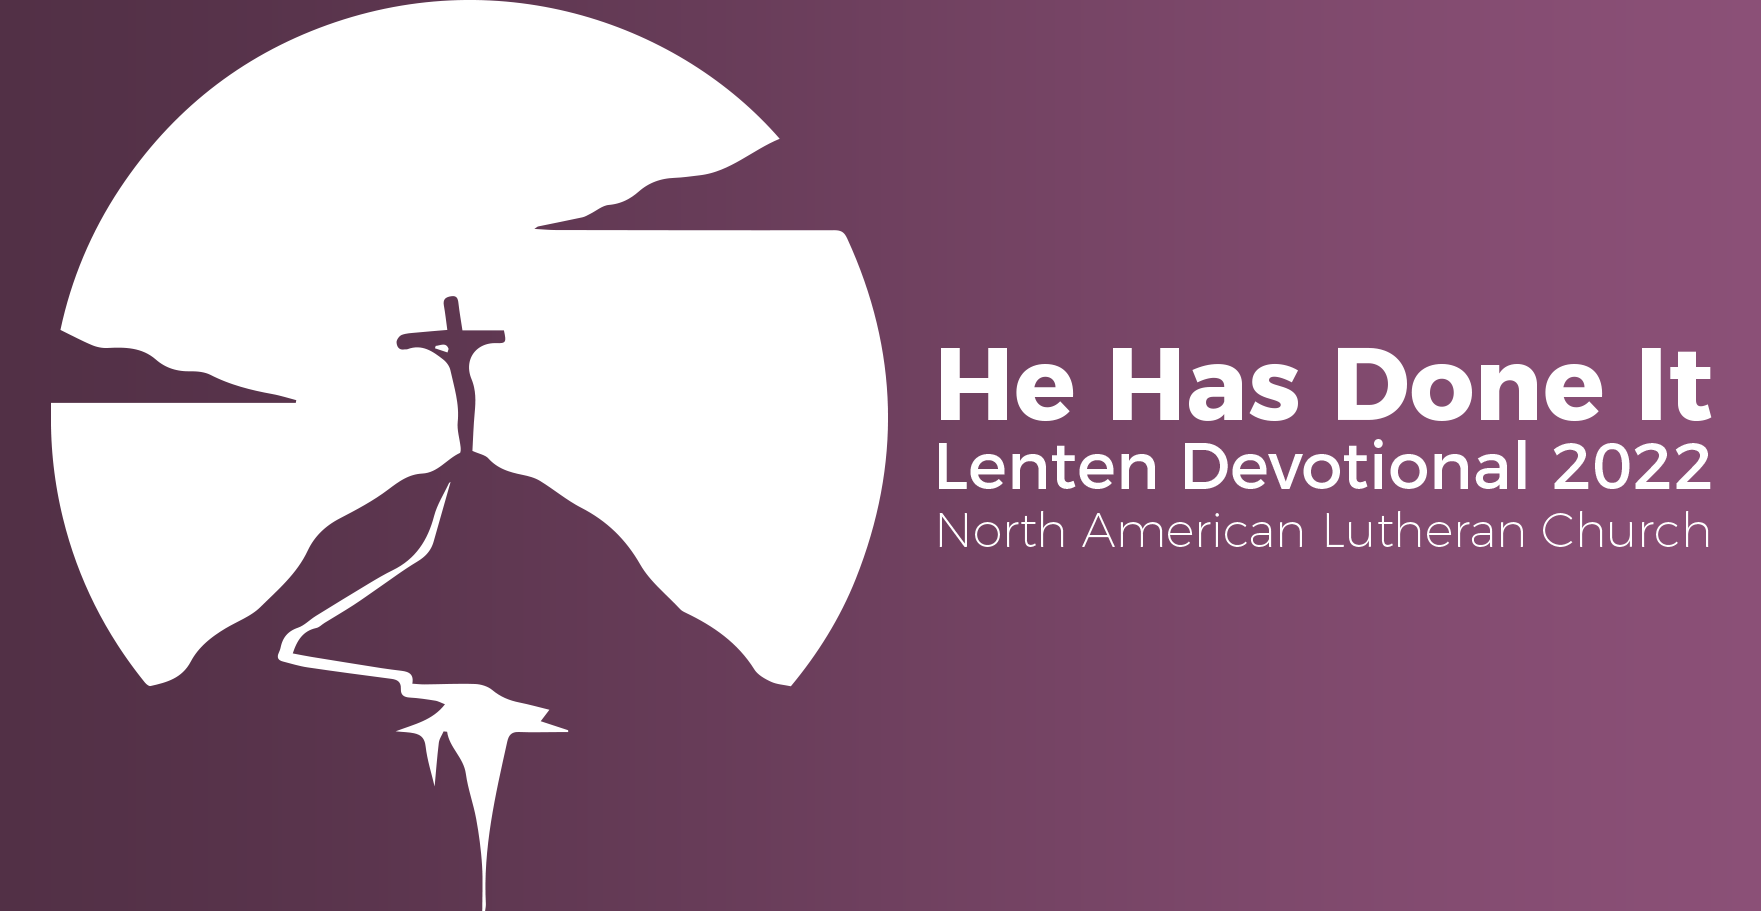 March 26, 2022 | Saturday of the Week of Lent III